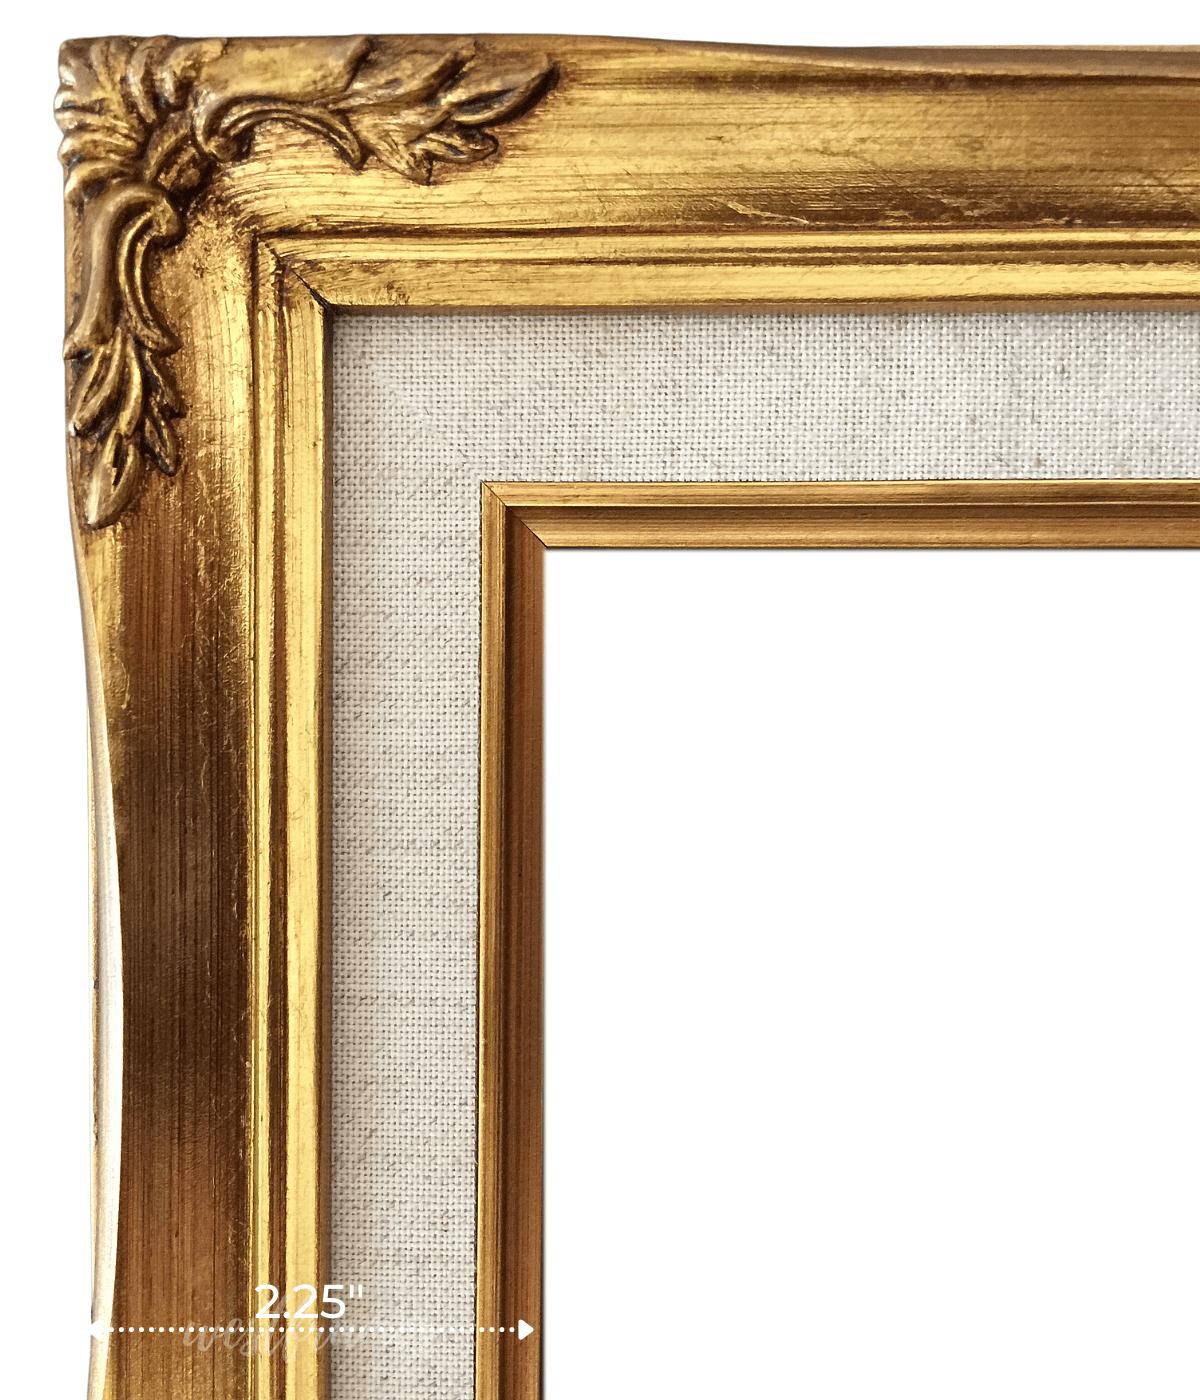  20x24 Gold Frames, Baroque Frame for Canvas, Painting, Large  Picture Frame, Ornate Wedding Frame : Handmade Products